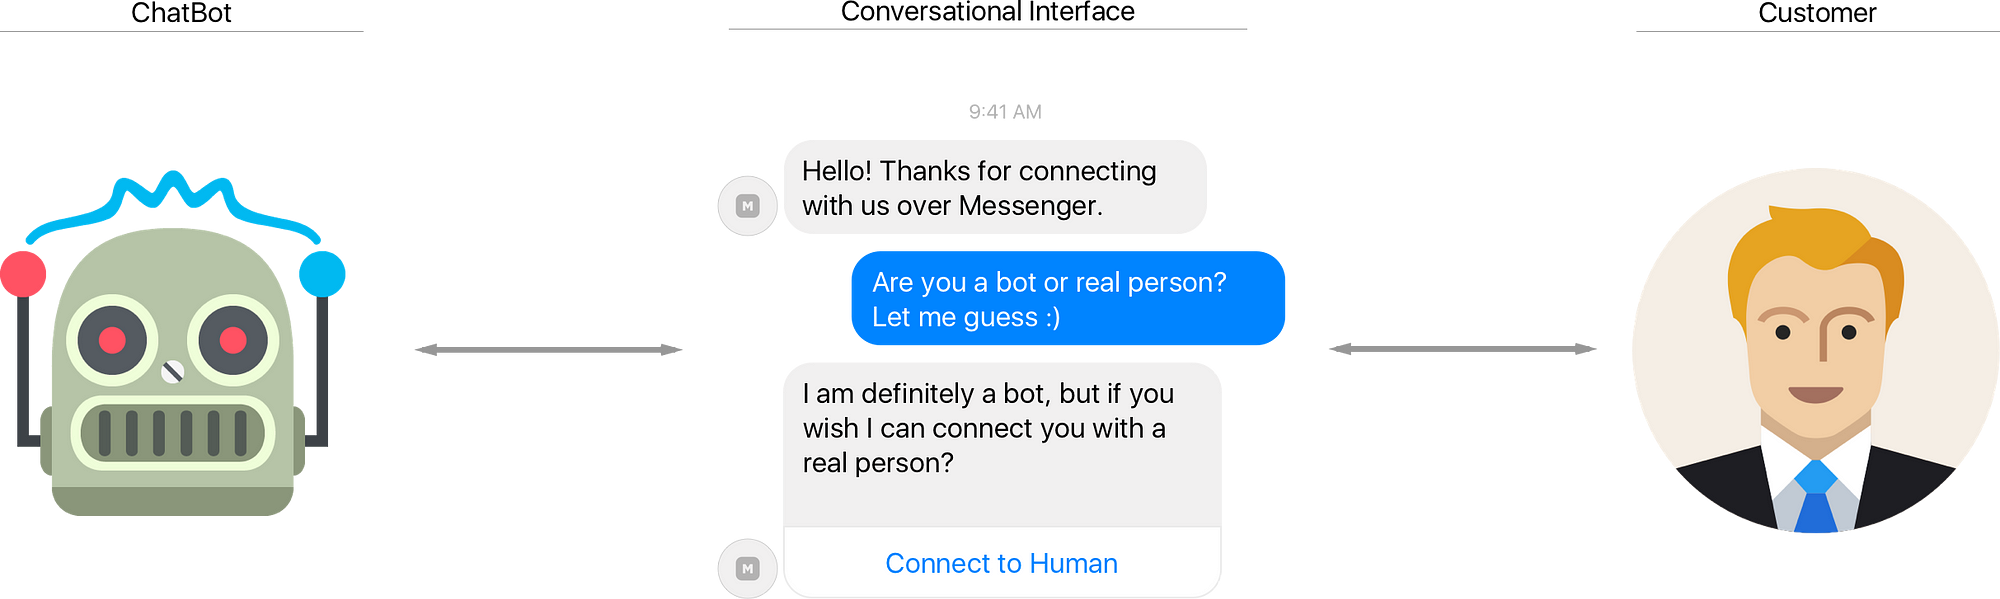 støn ubemandede Sow Conversational Interfaces Breakthroughs And Good Use Cases For Building  ChatBots? | by Elia Palme | Chatbots Magazine